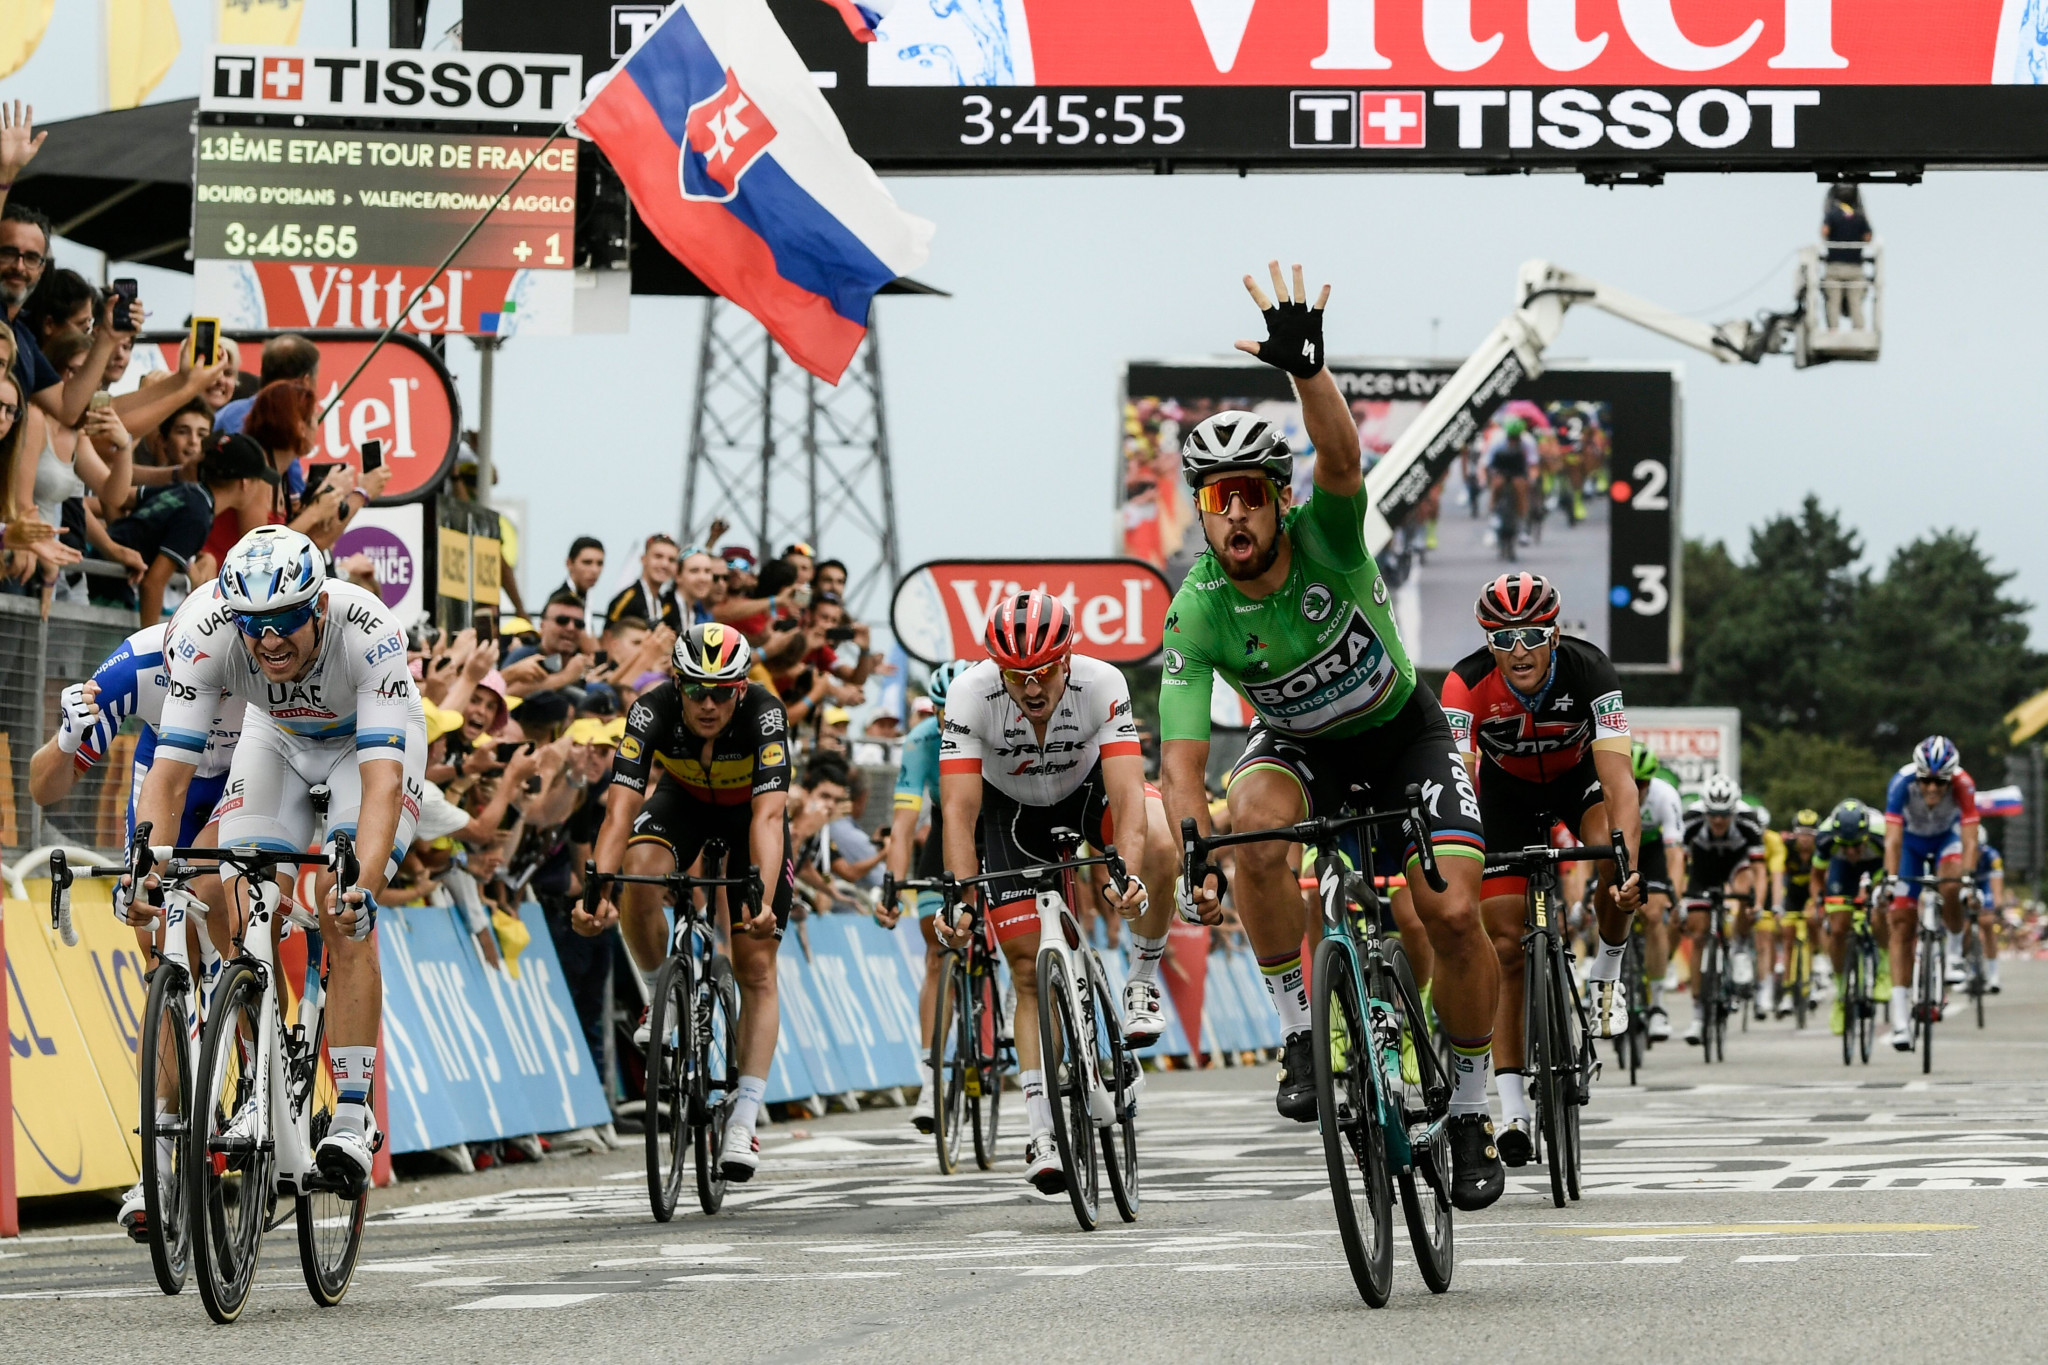 Sagan sprints to third Tour de France stage win as race director addresses fan incidents